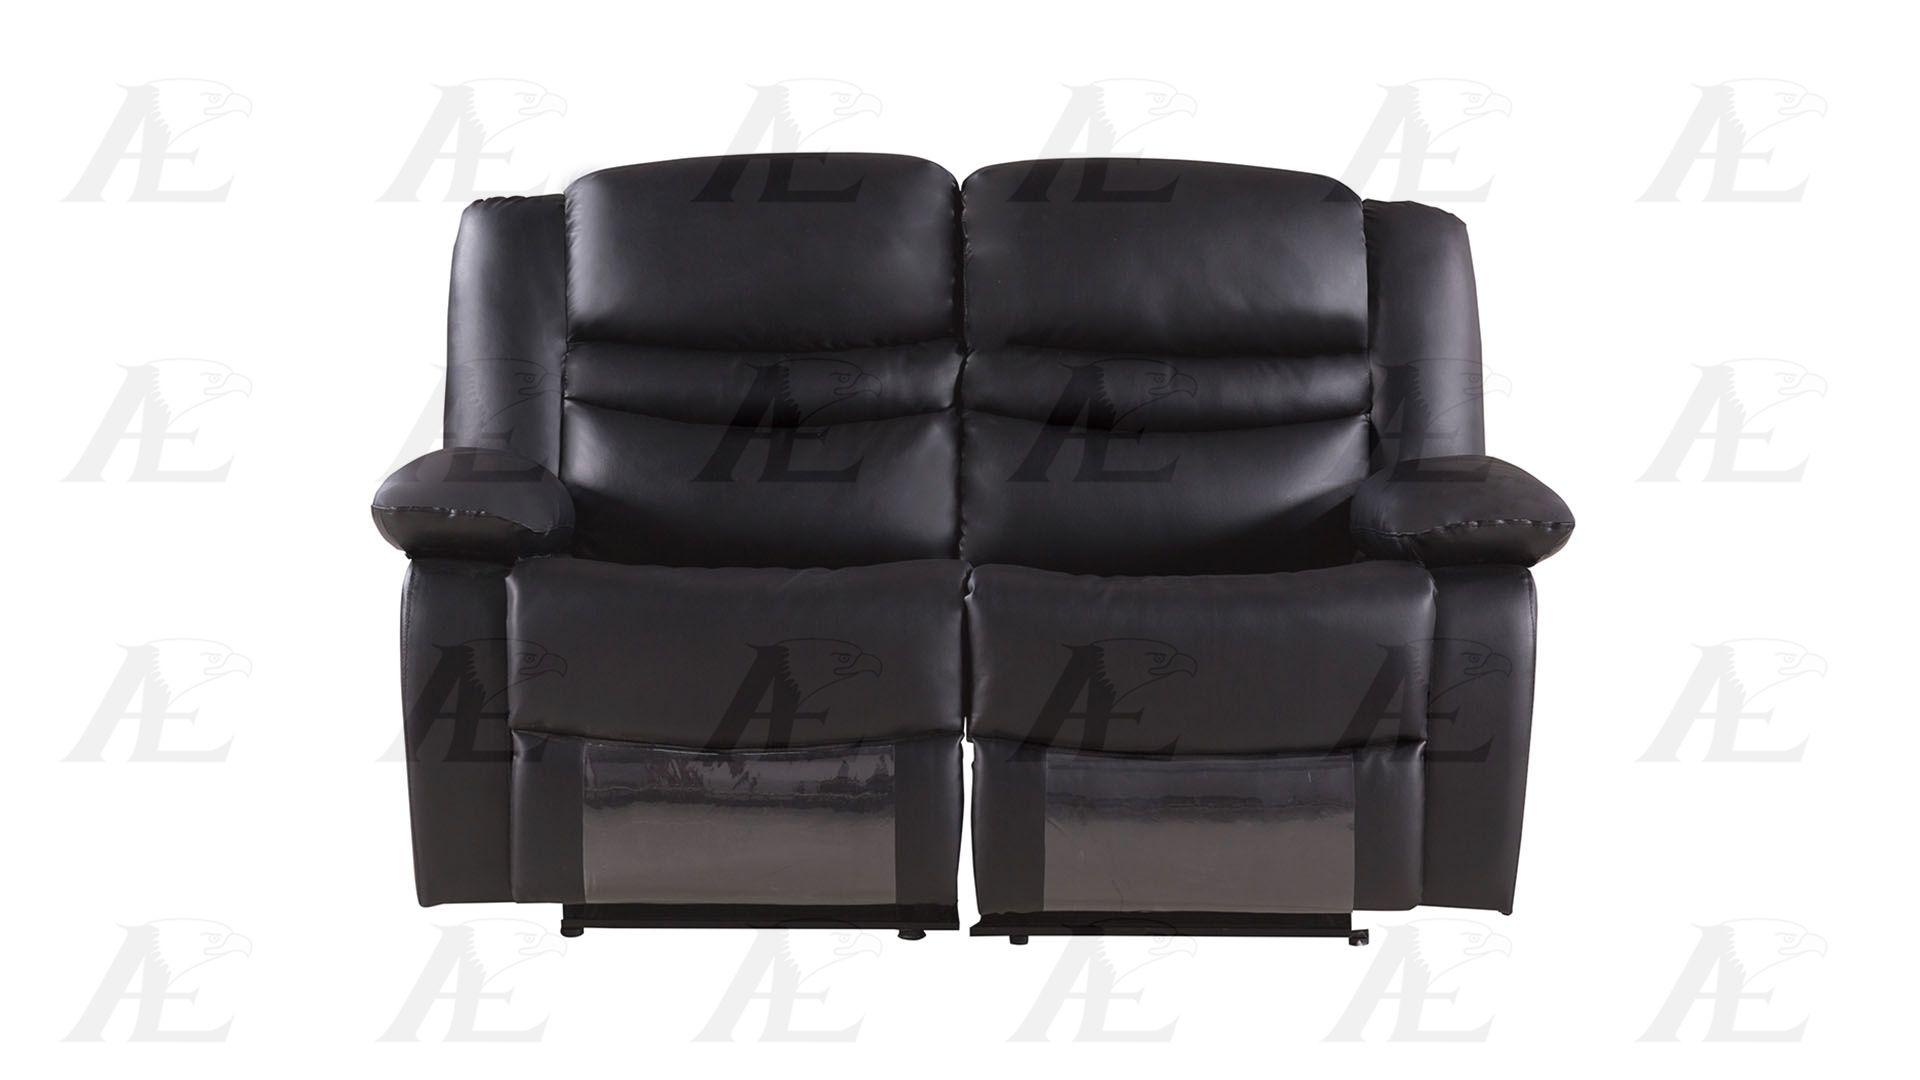 

                    
American Eagle Furniture AE-D823-BK Reclining Black Bonded Leather Purchase 
